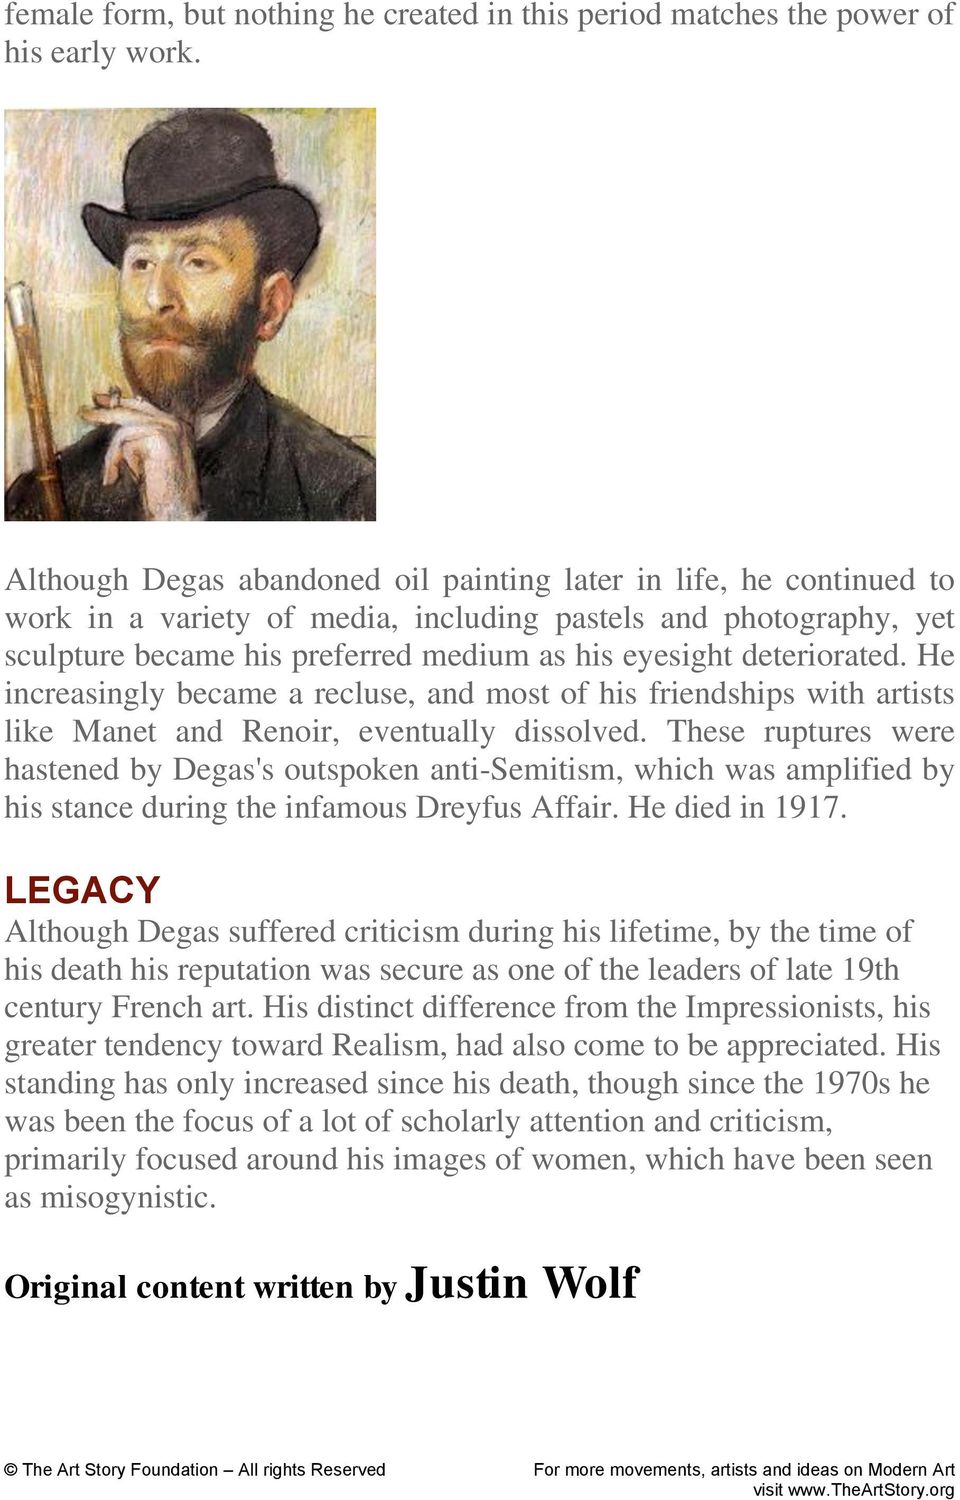 deteriorated. He increasingly became a recluse, and most of his friendships with artists like Manet and Renoir, eventually dissolved.